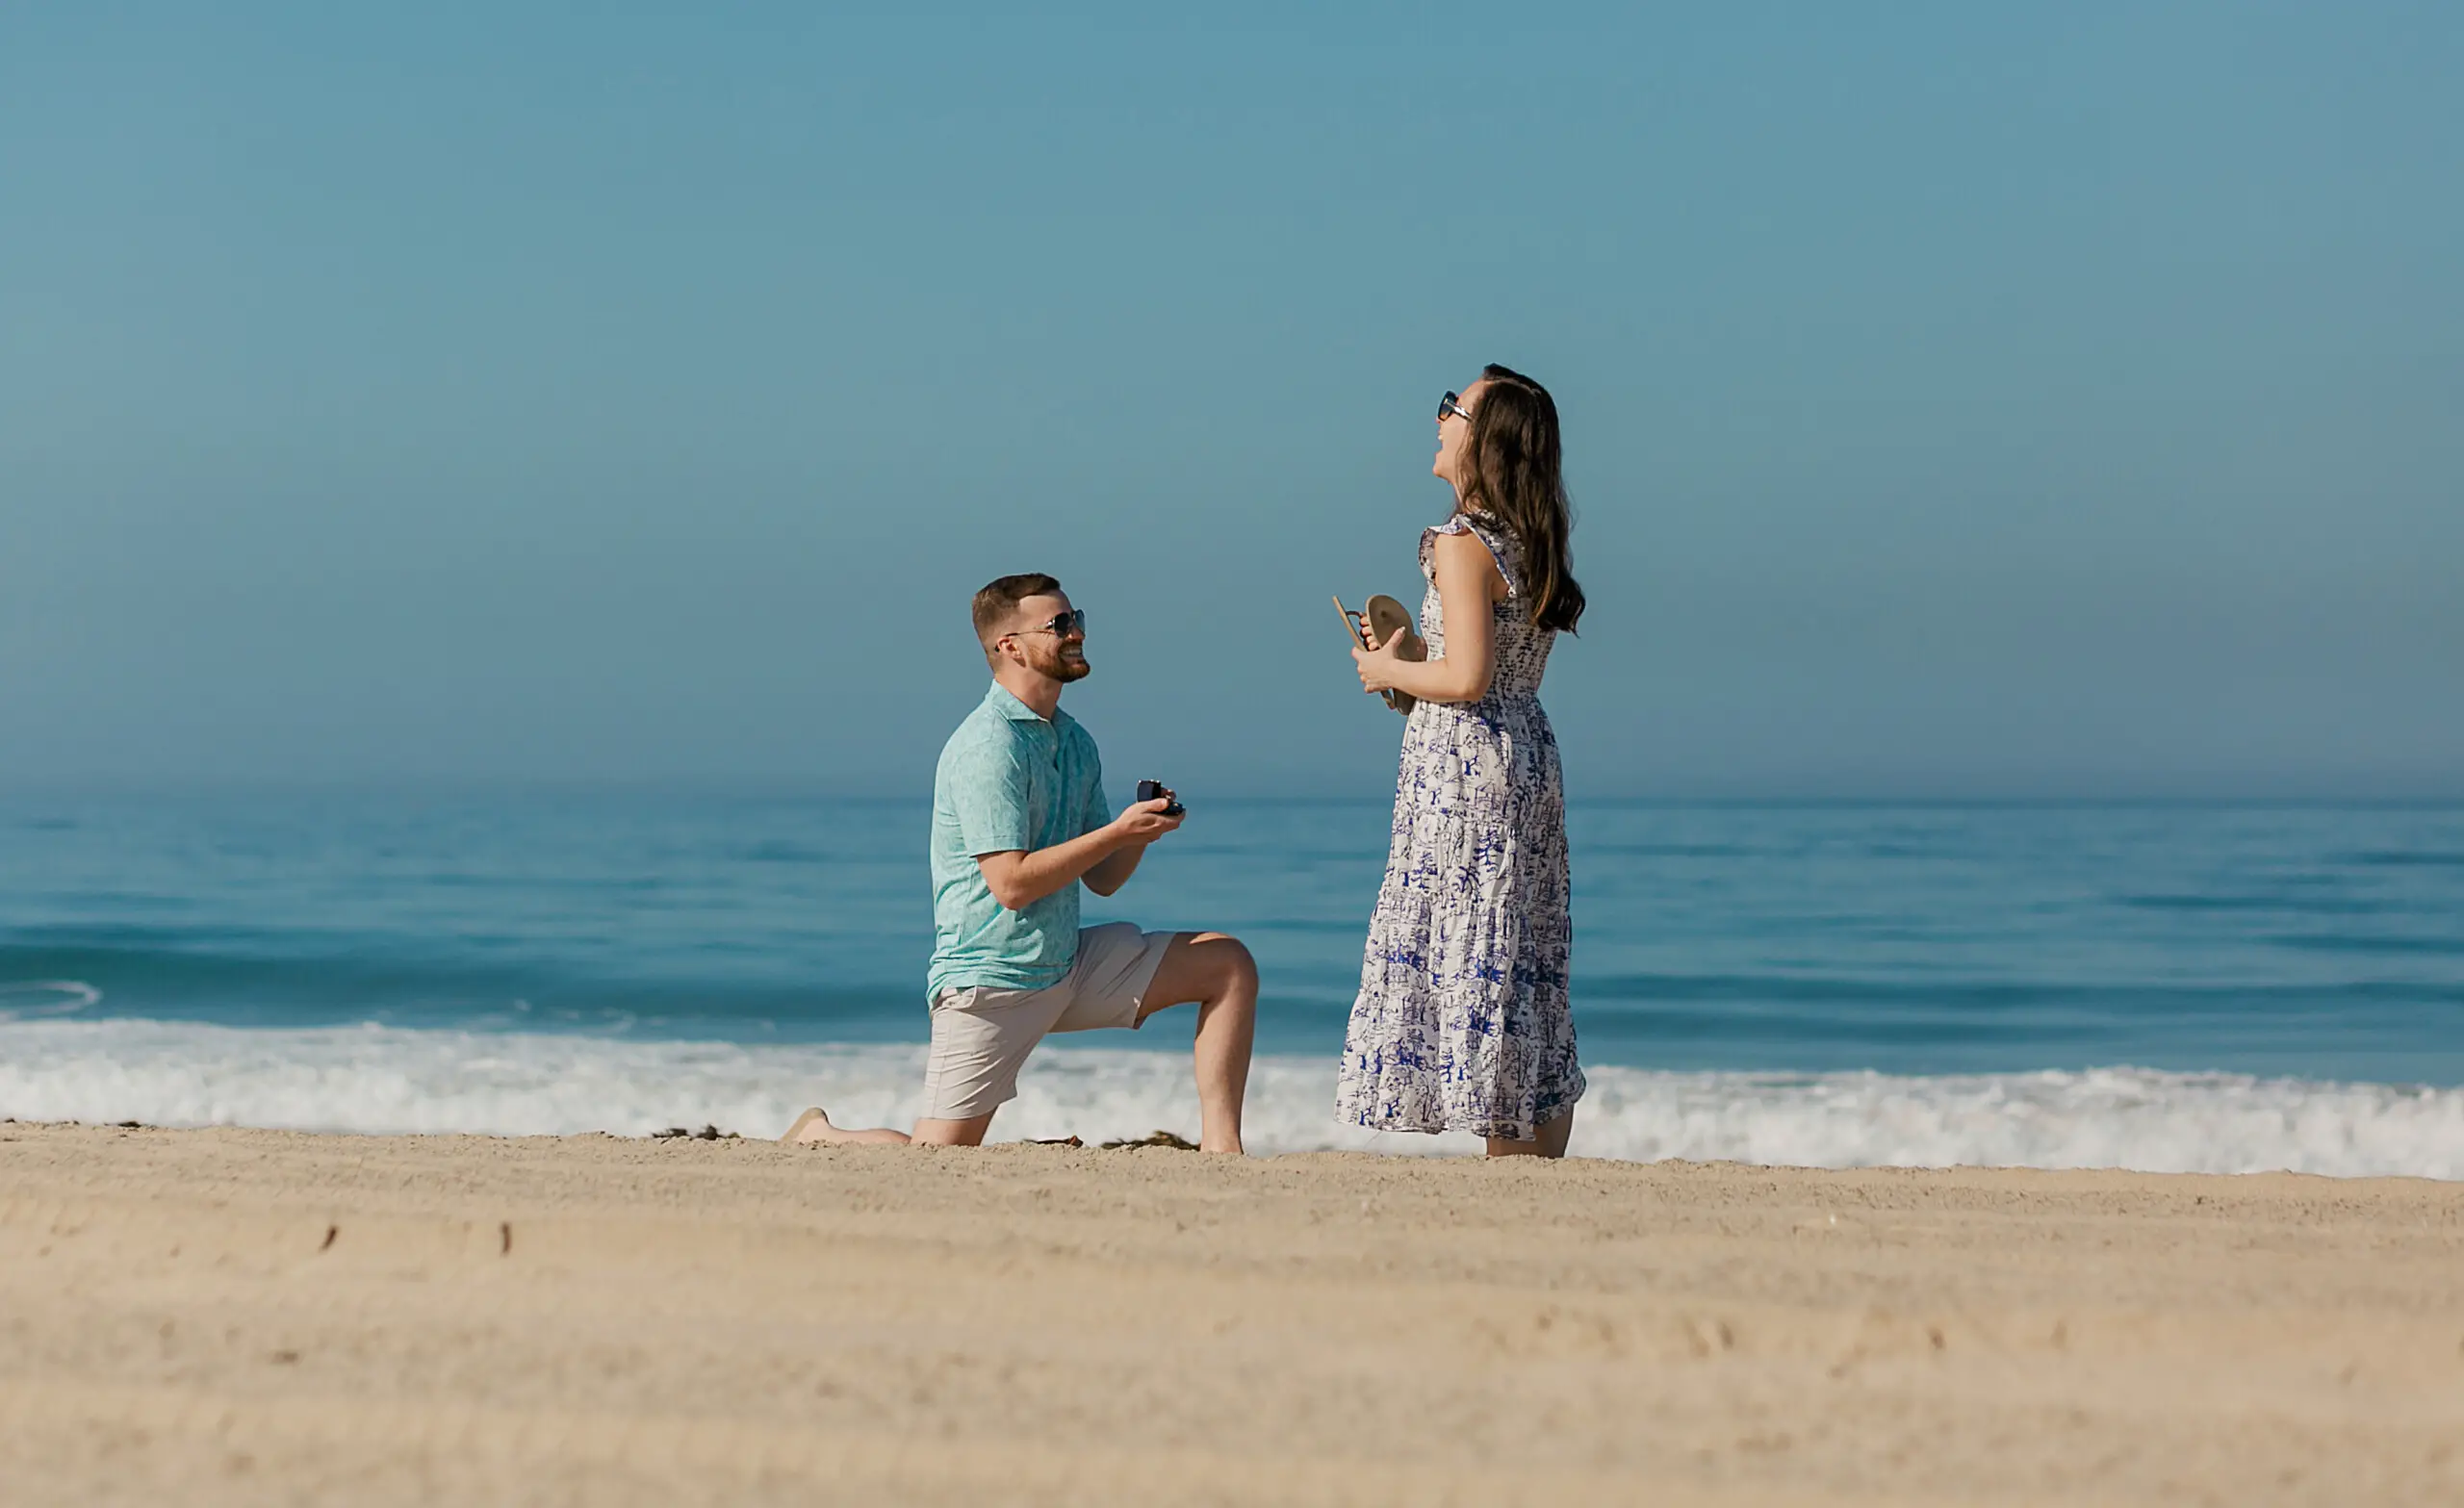 Proposal photoshoot by Eduard, Localgrapher in Los Angeles